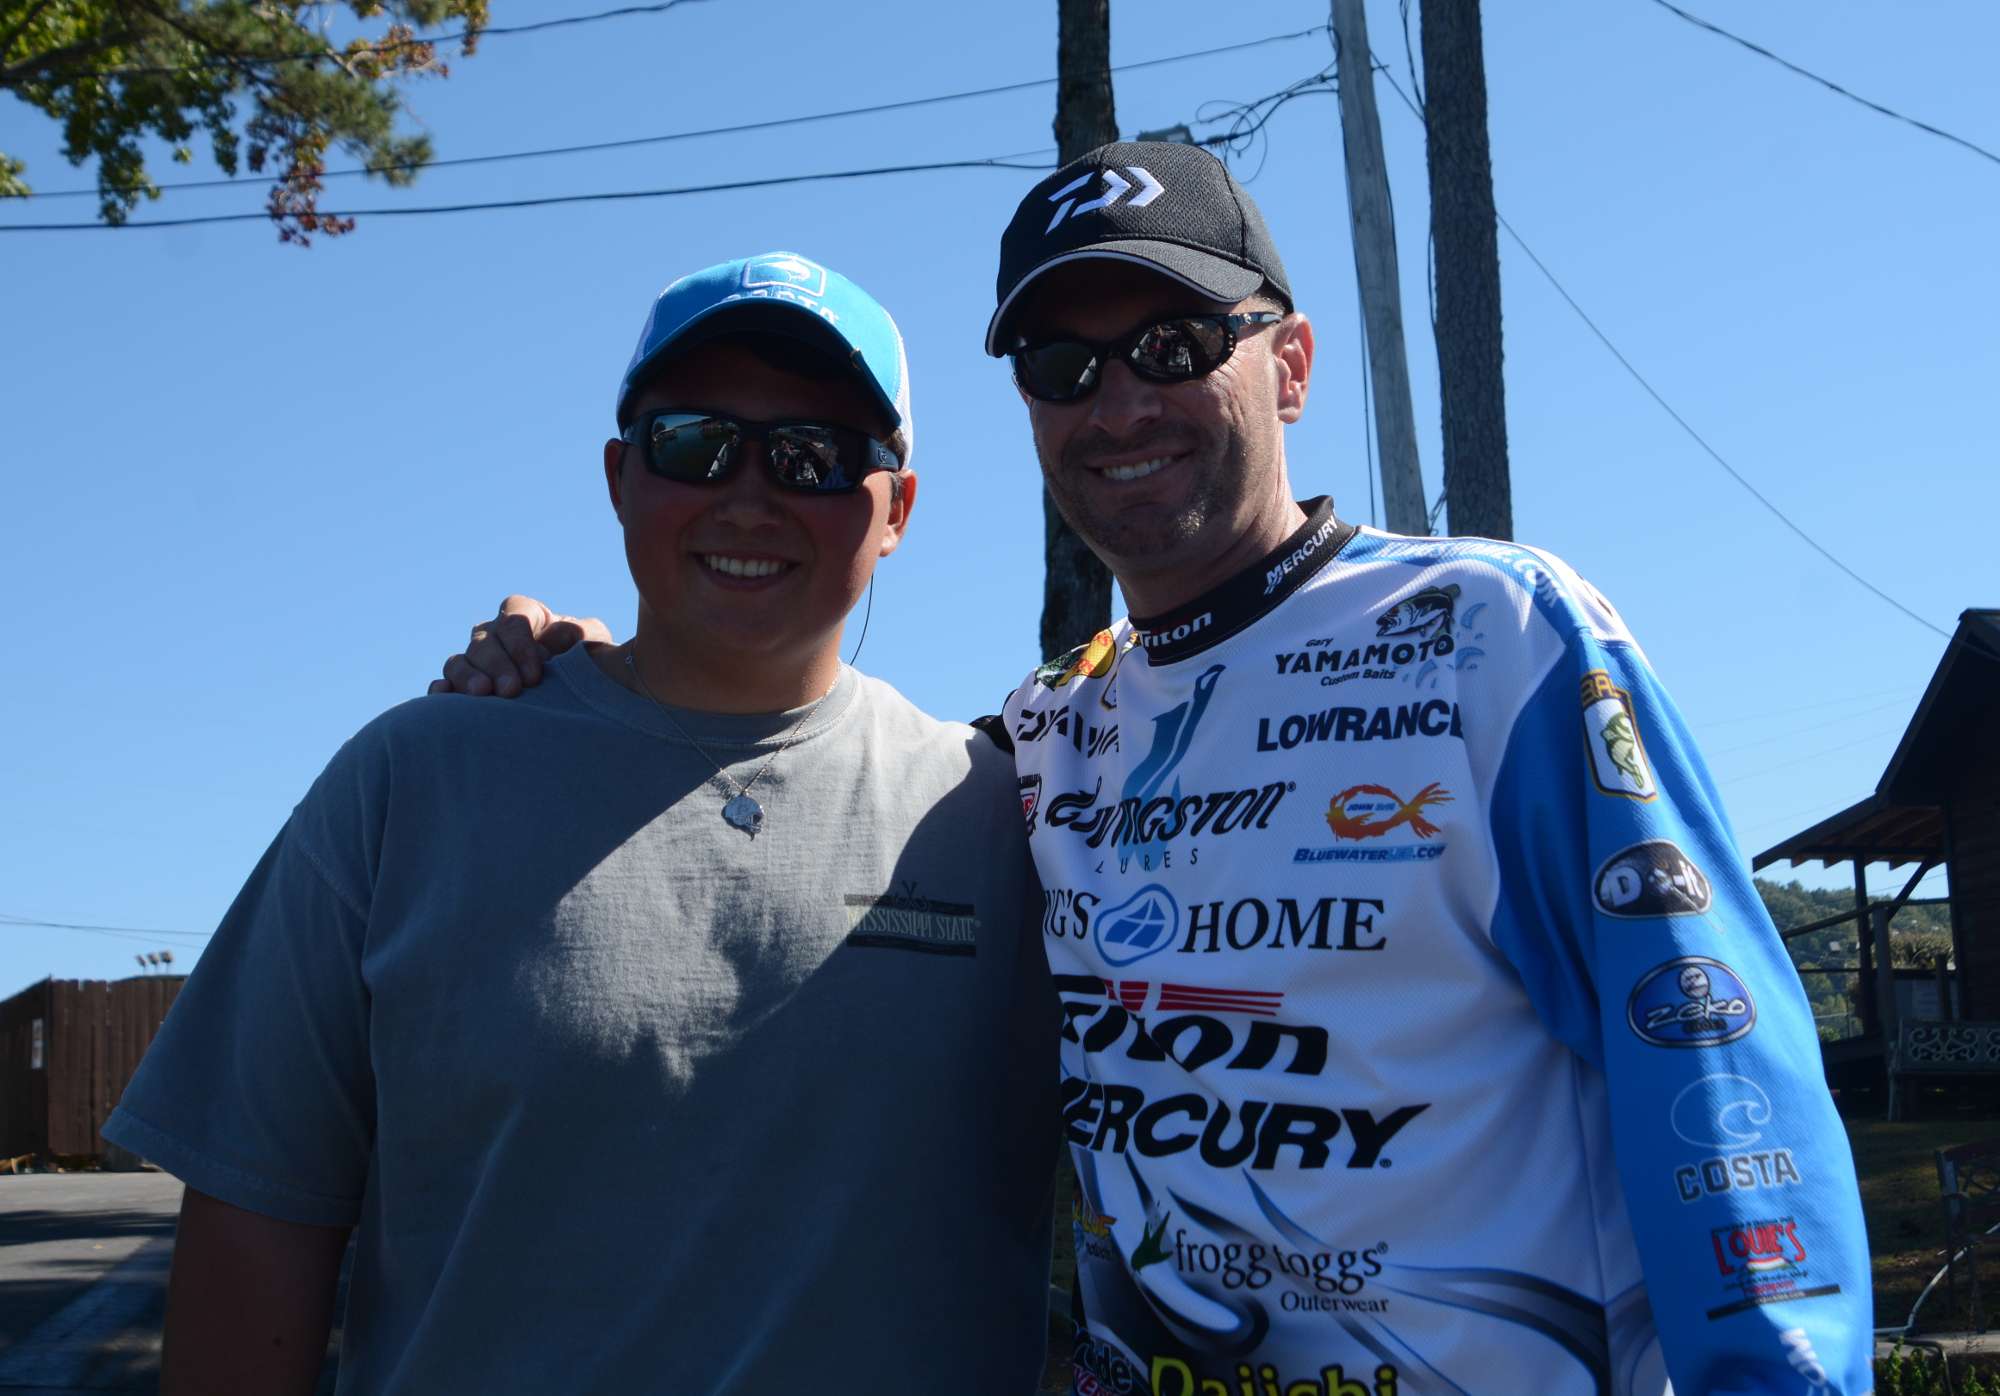 Howell was happy to meet Ballard unexpectedly. Lane said that's what it's like at Guntersville now; you can't drive down the street without seeing a Bassmaster Elite Series pro!